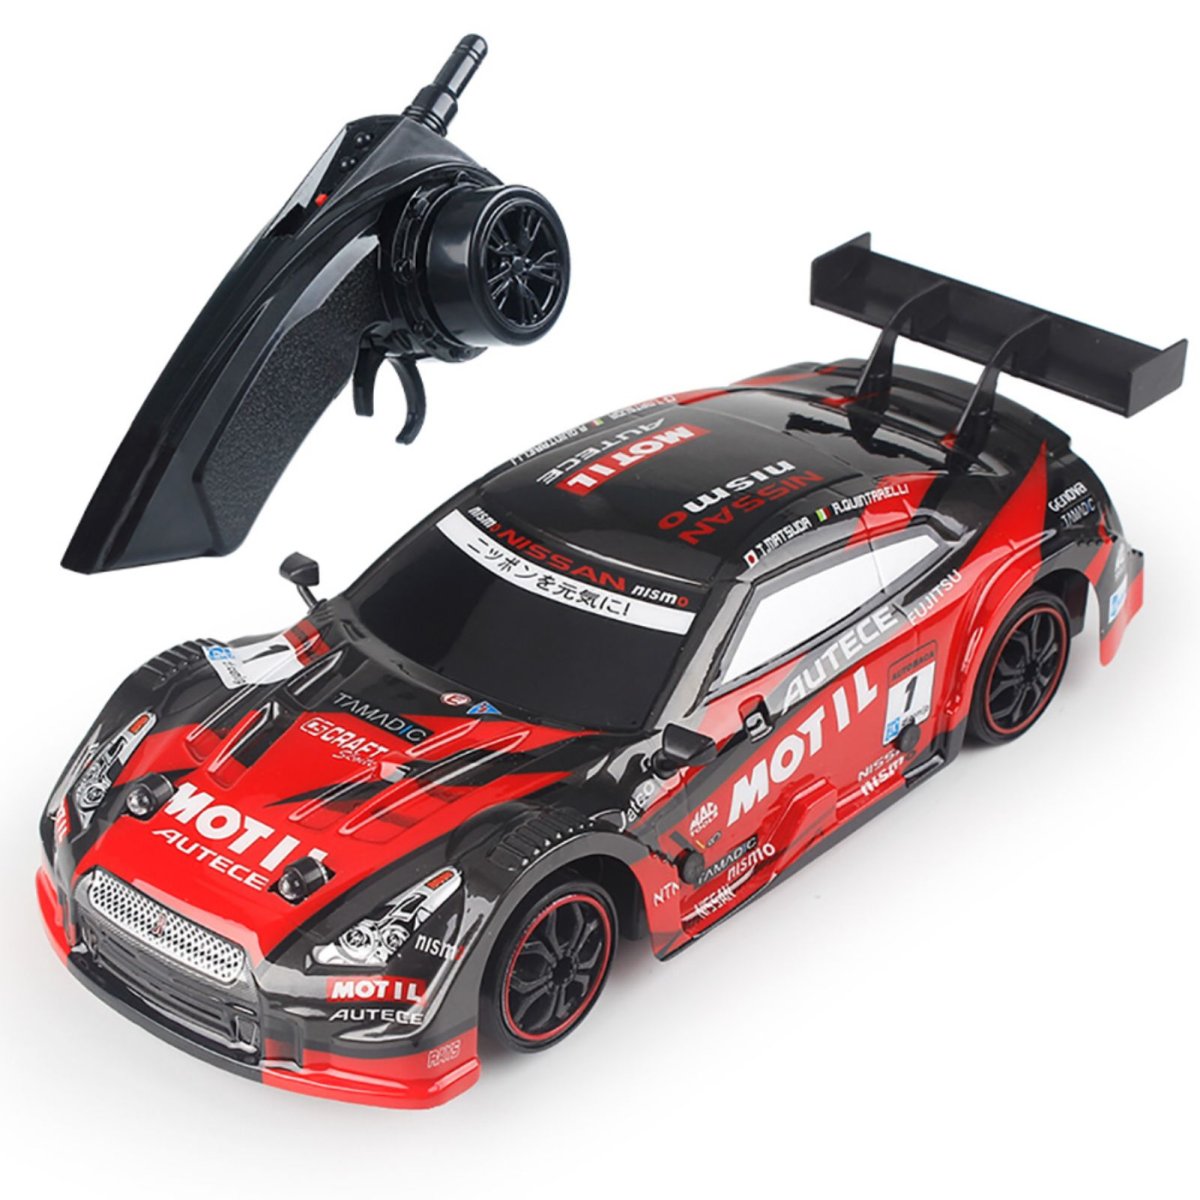 1/16 2.4G 4wd 28cm Drift RC car 28km/h with Front led Light RTR Toy